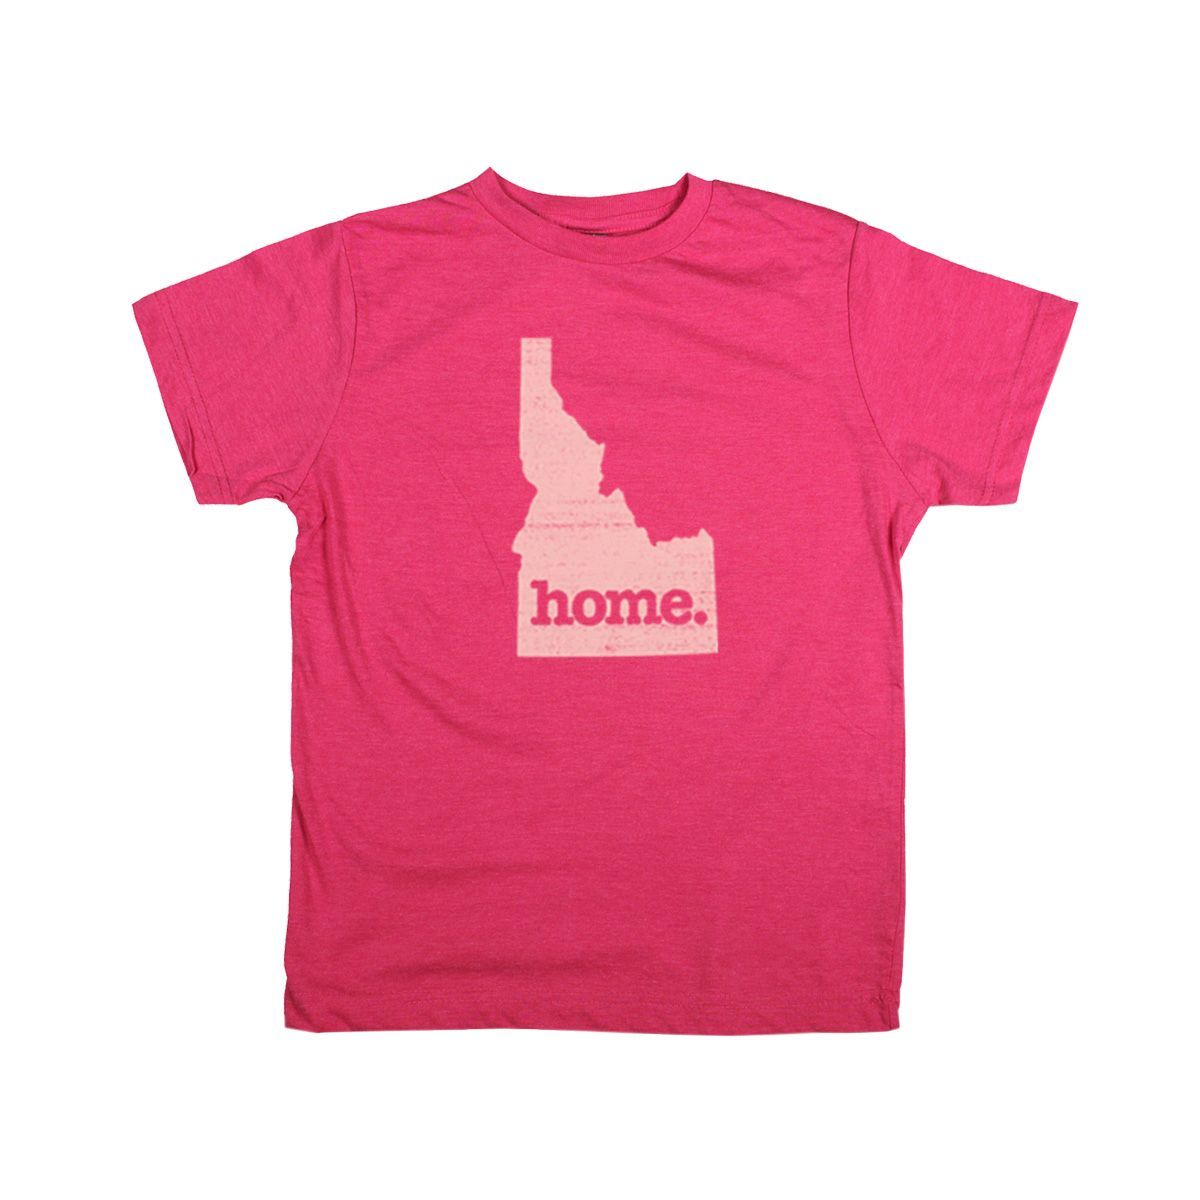 home. Youth/Toddler T-Shirt - Mississippi